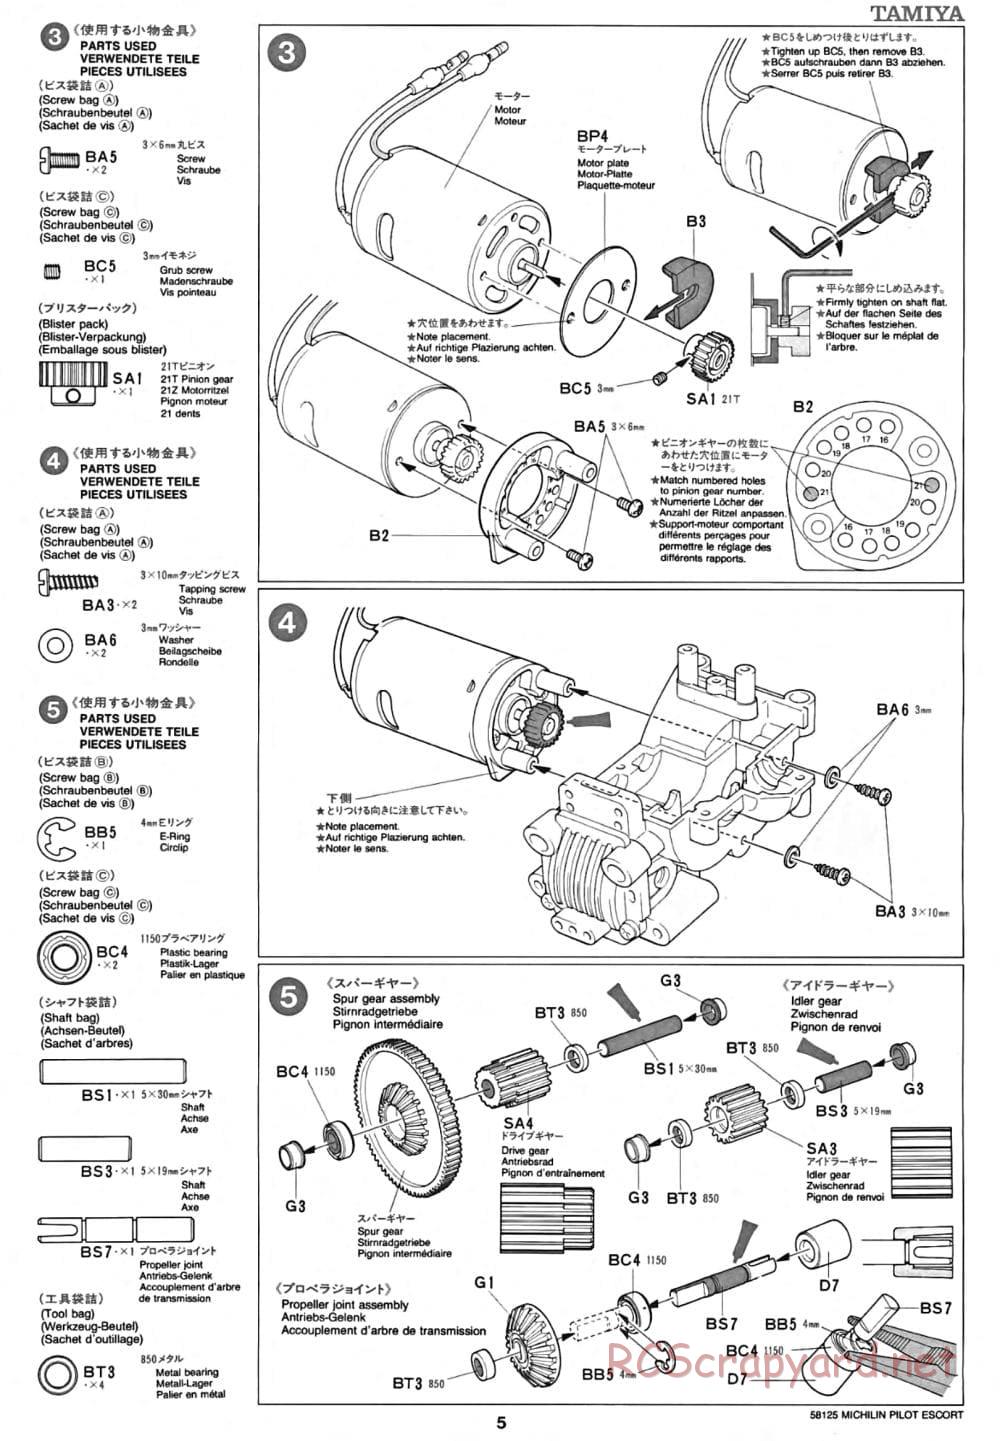 Tamiya - Michelin Pilot Ford Escort RS Cosworth - TA-01 Chassis - Manual - Page 5